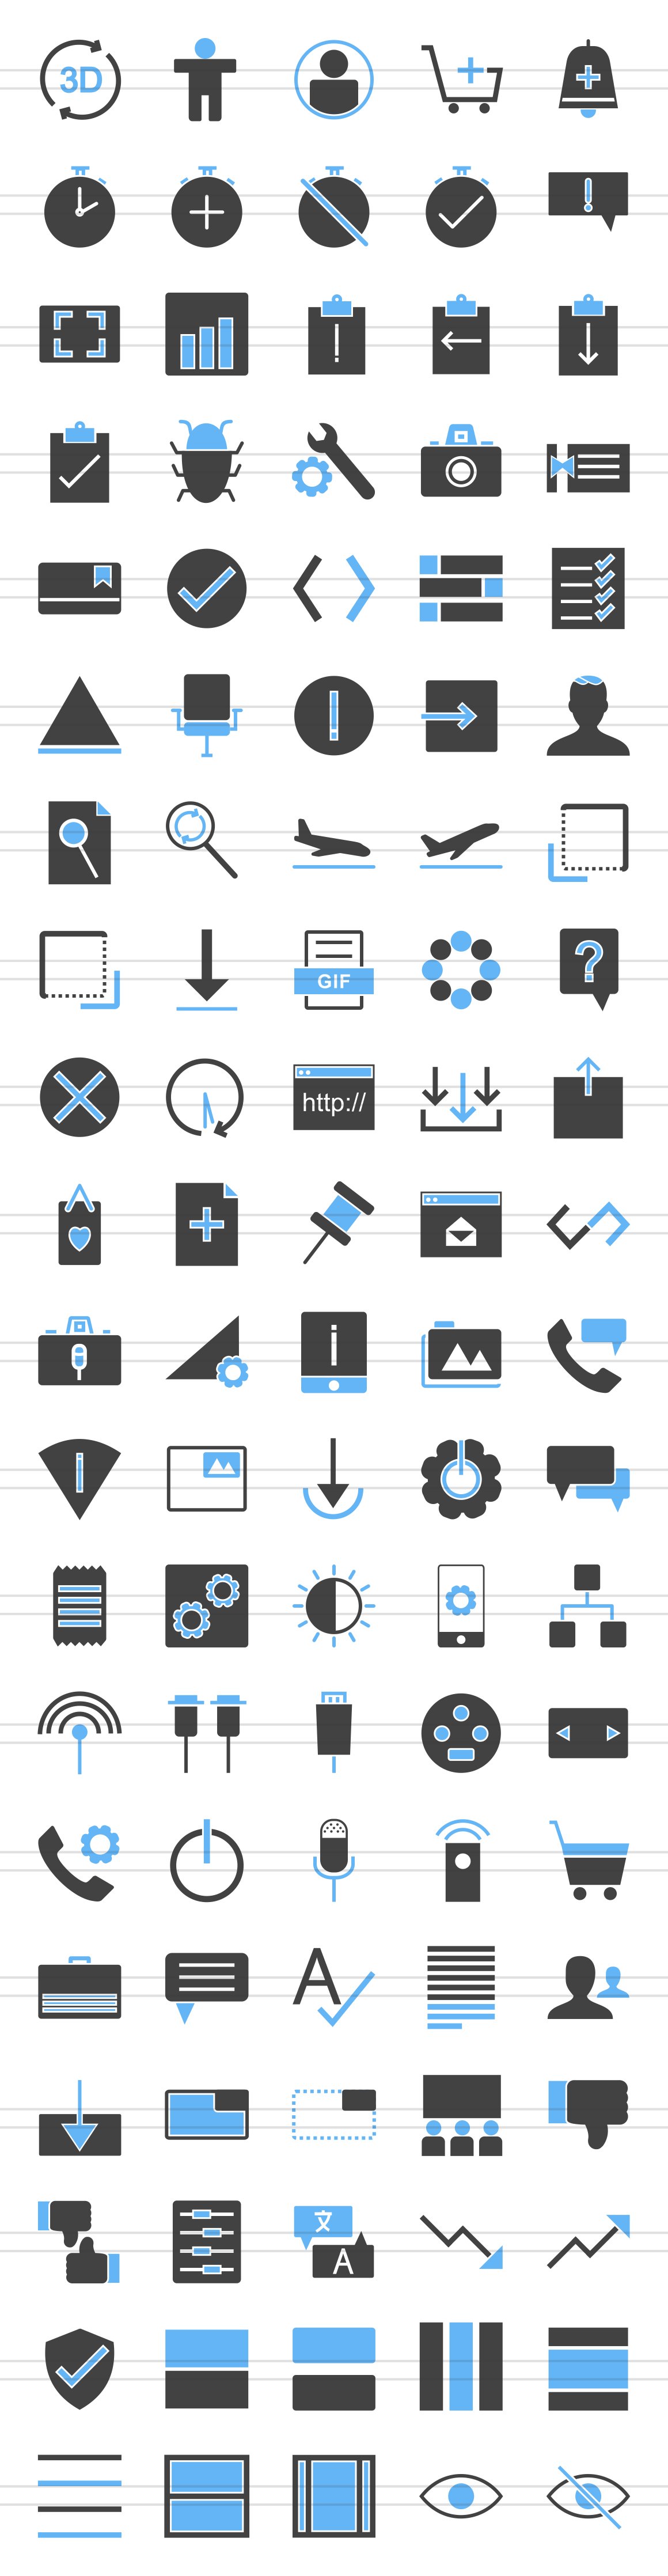 100 Material Design Blue&Black Icons preview image.